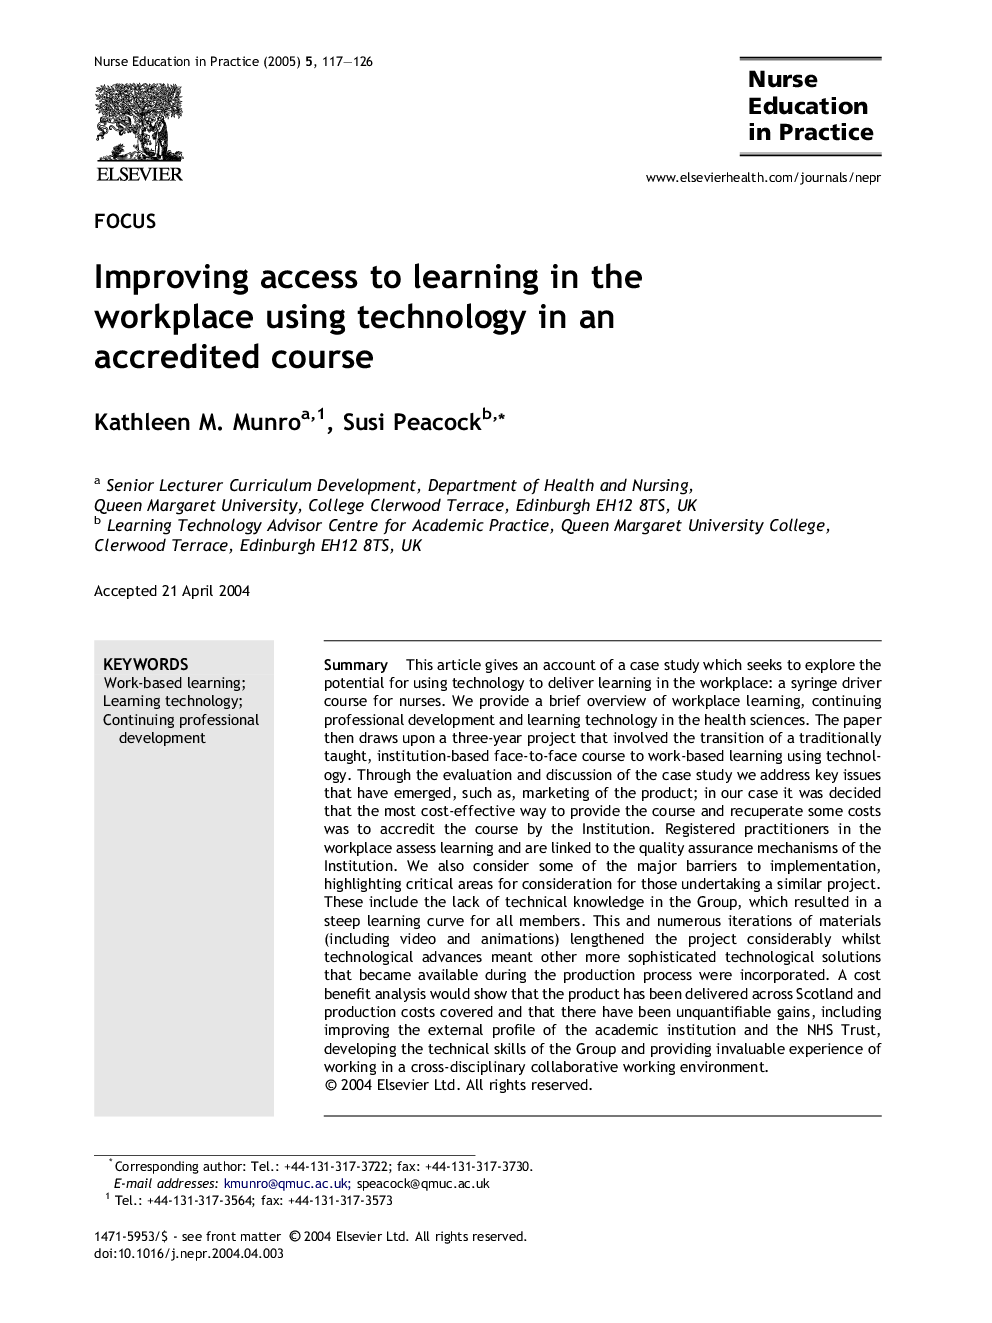 Improving access to learning in the workplace using technology in an accredited course